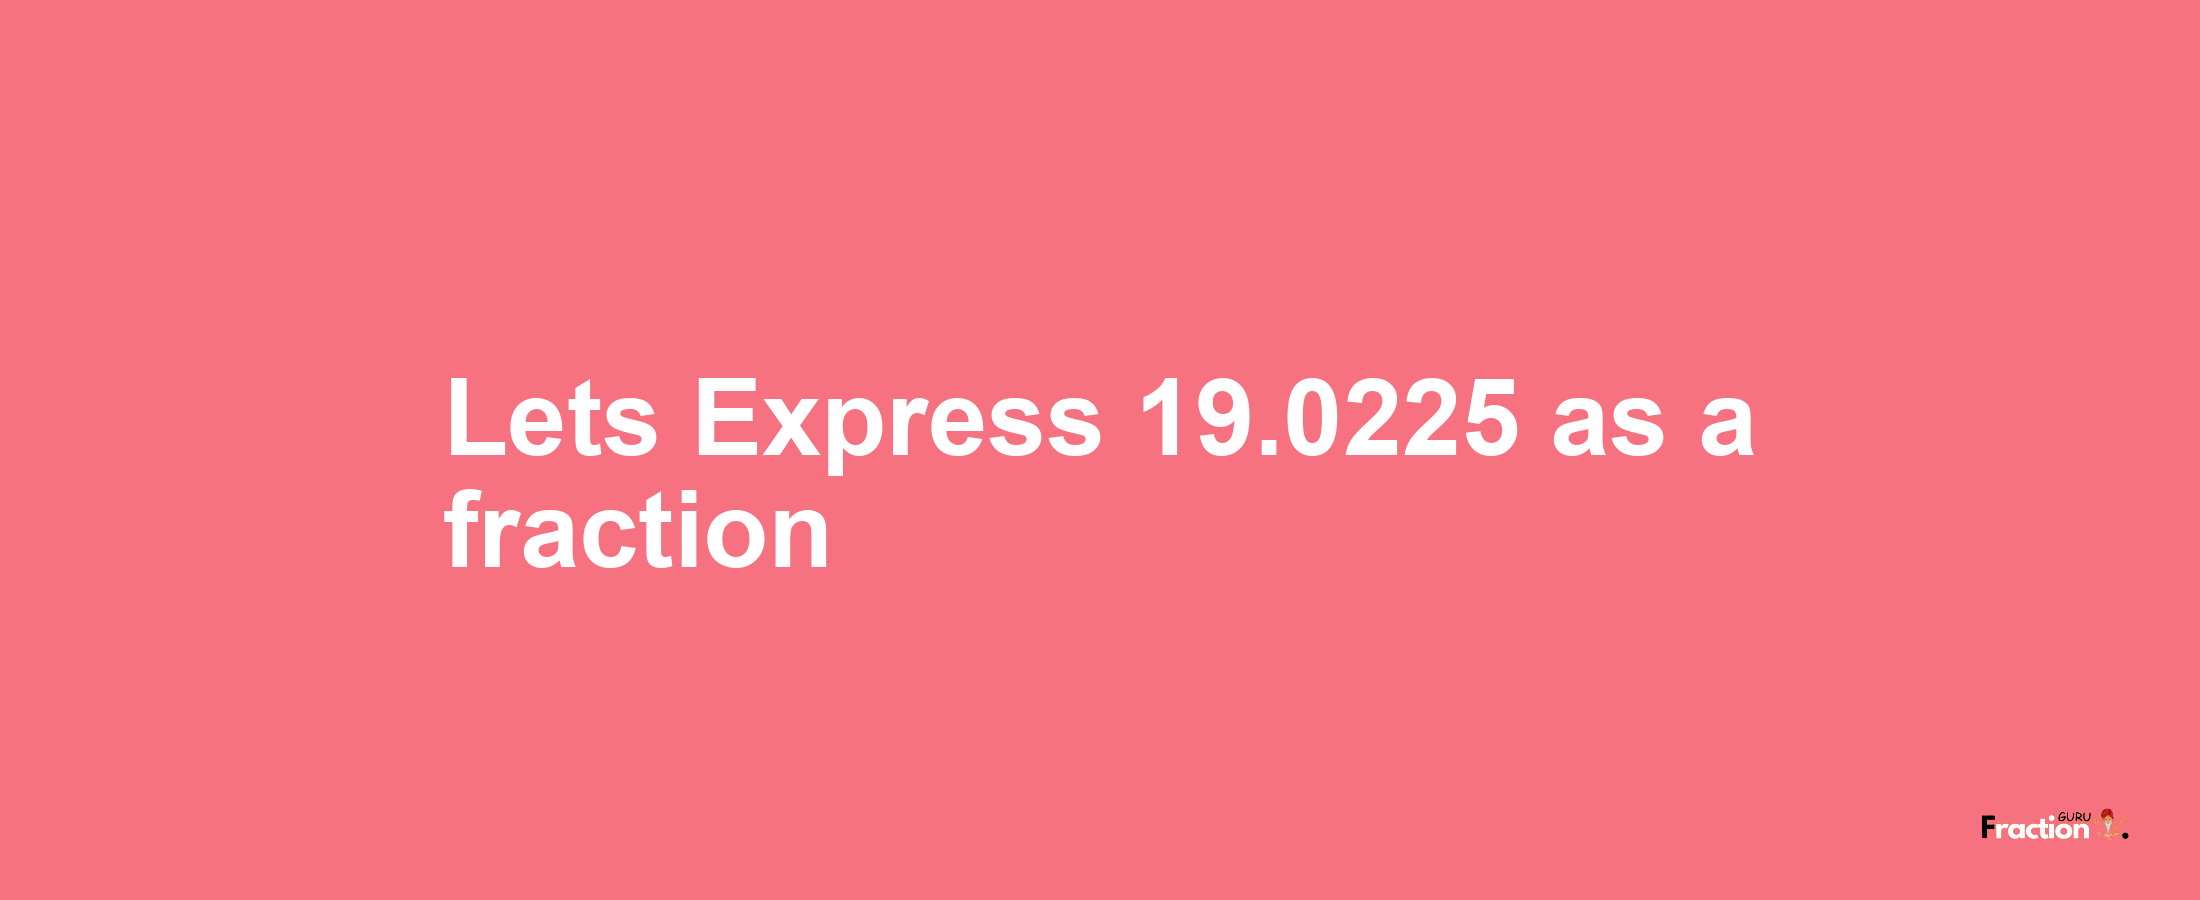 Lets Express 19.0225 as afraction